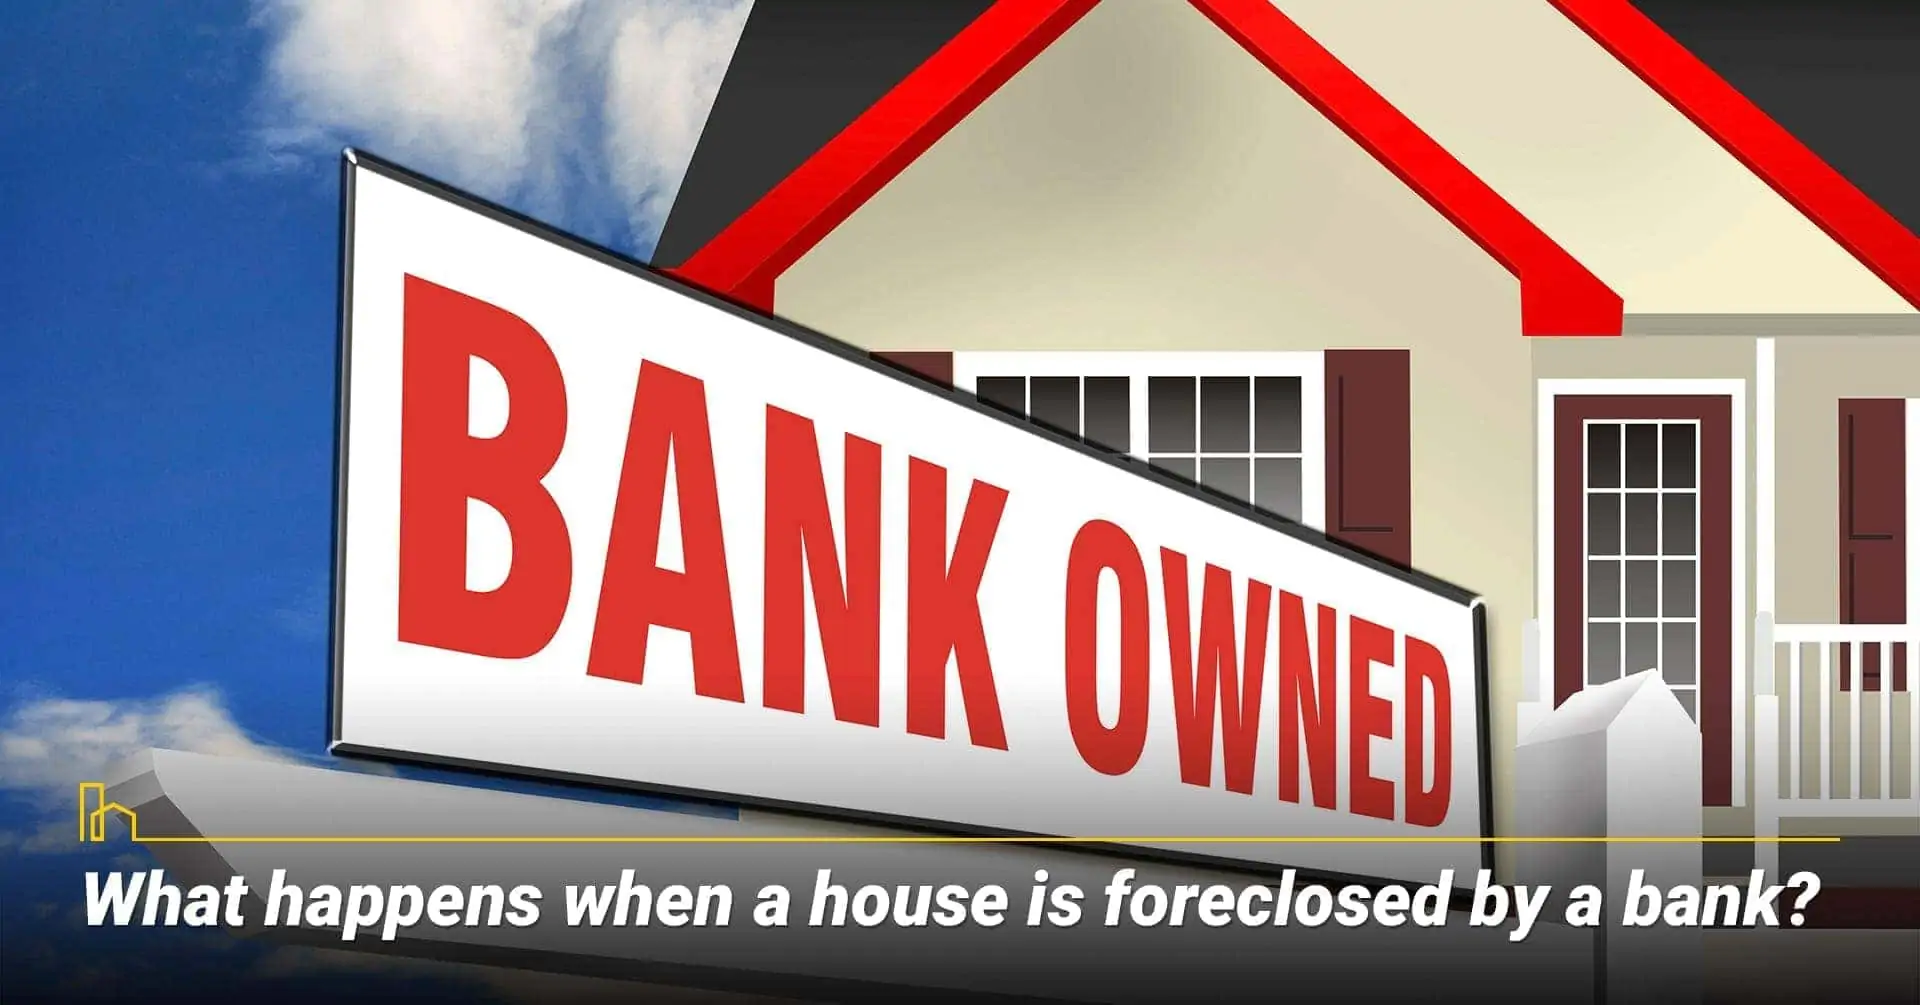 What happens when a house is foreclosed by a bank? the house is owned by the bank